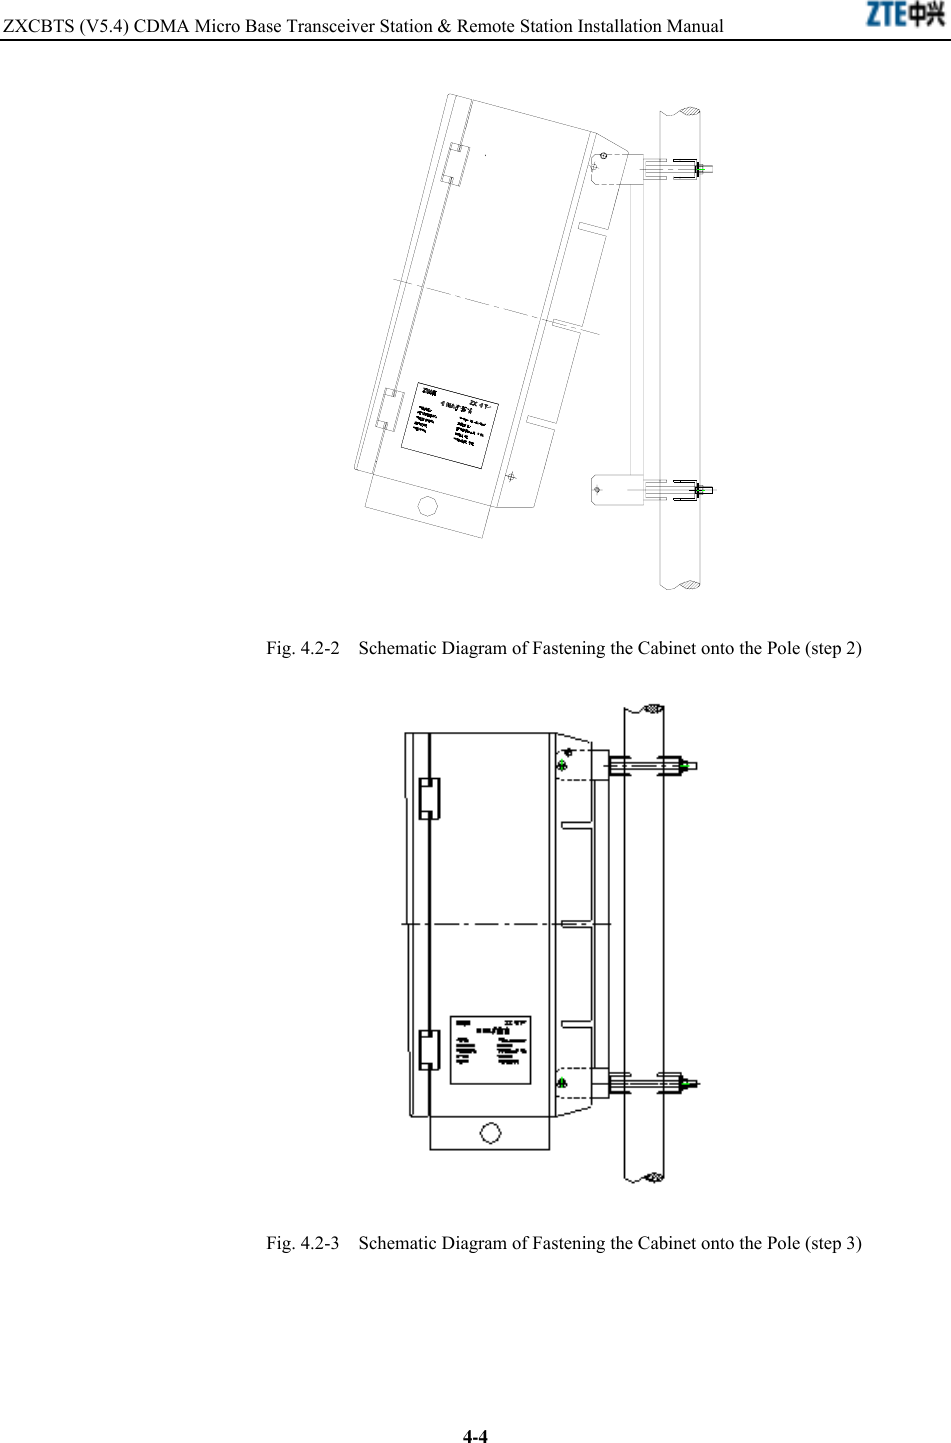 ZXCBTS (V5.4) CDMA Micro Base Transceiver Station &amp; Remote Station Installation Manual    4-4  Fig. 4.2-2  Schematic Diagram of Fastening the Cabinet onto the Pole (step 2)  Fig. 4.2-3  Schematic Diagram of Fastening the Cabinet onto the Pole (step 3) 